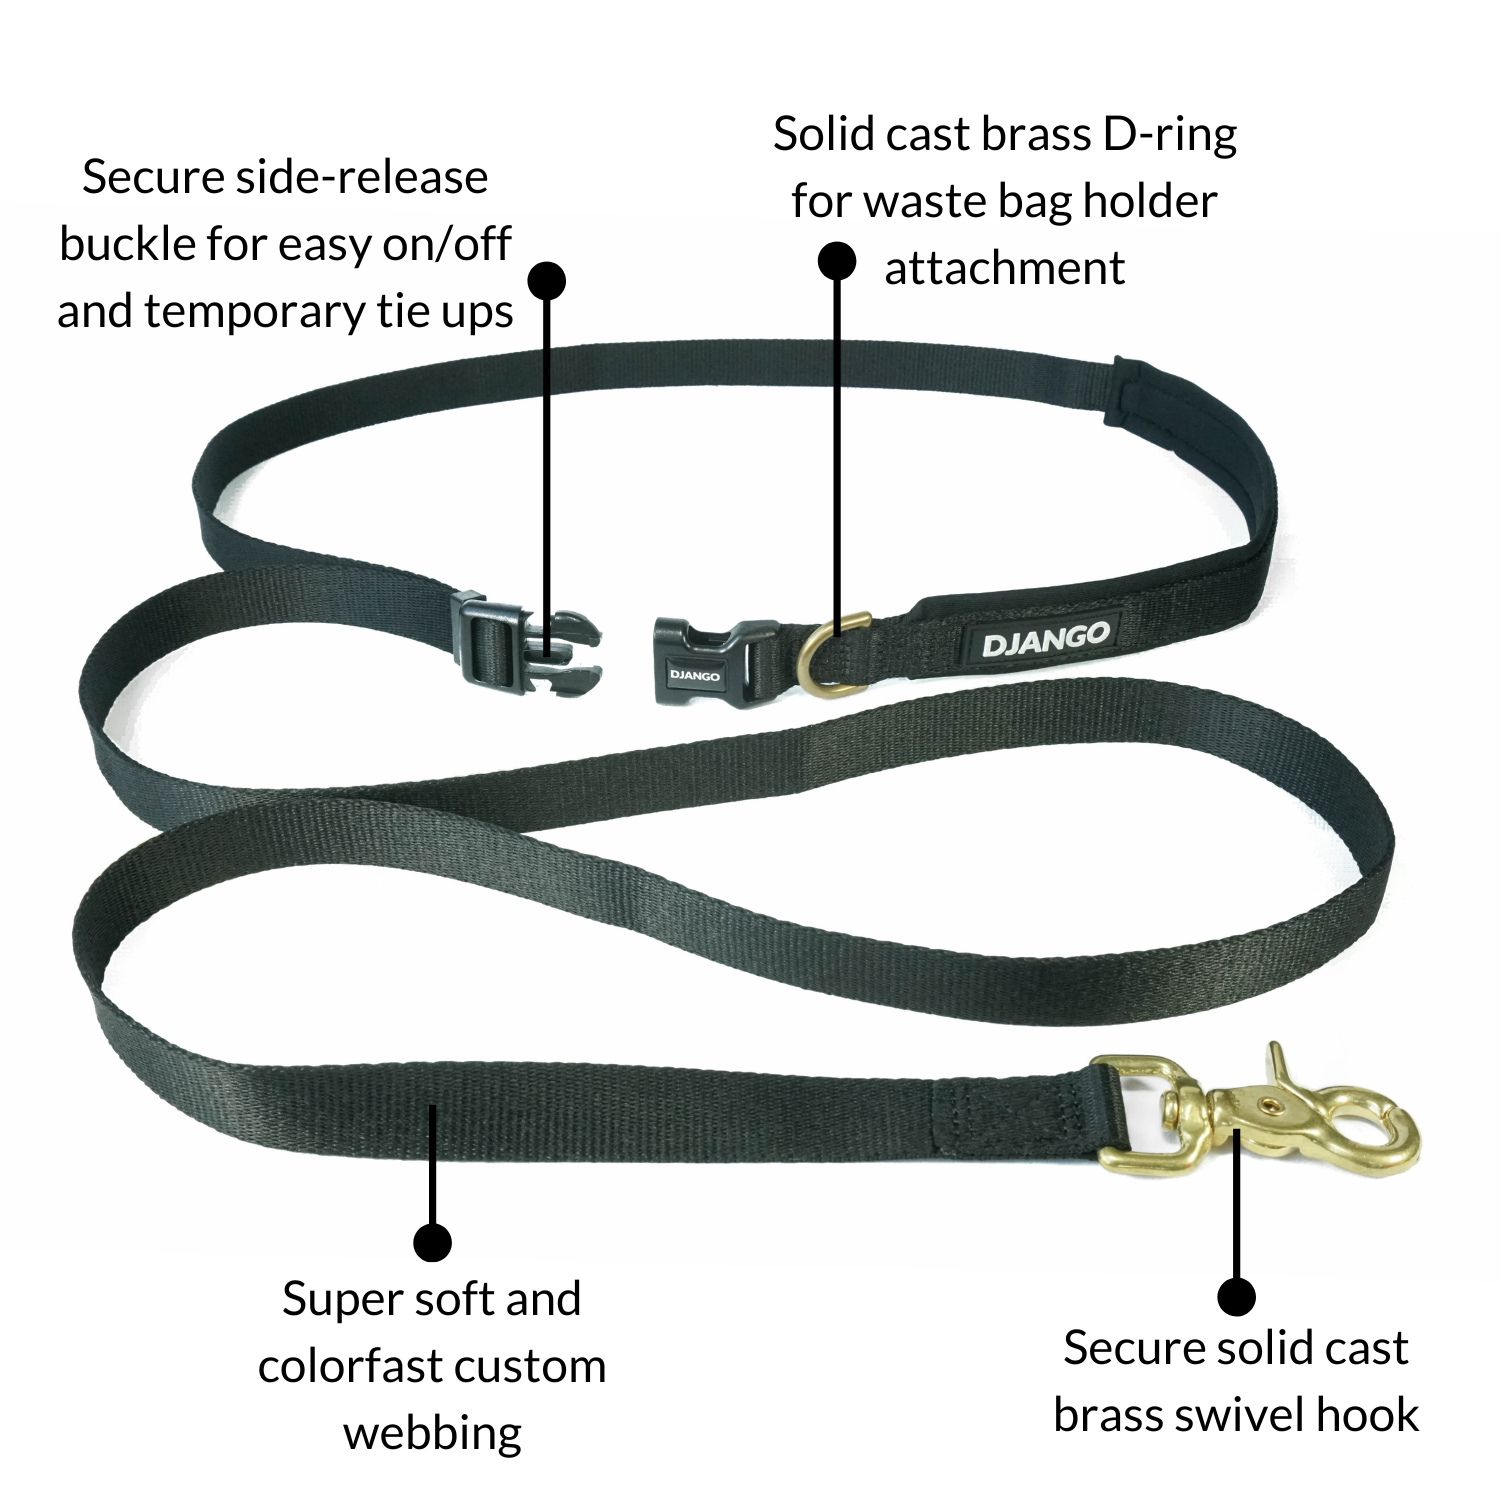 DJANGO’s Adjustable Hands-Free Adventure Dog Leash features a padded neoprene handles, a secure side-release buckle for easy on/off and temporary tie-ups, a solid brass D-ring for your favorite waste bag holder, and a solid brass swivel snap hook for harness or collar attachment - djangobrand.com